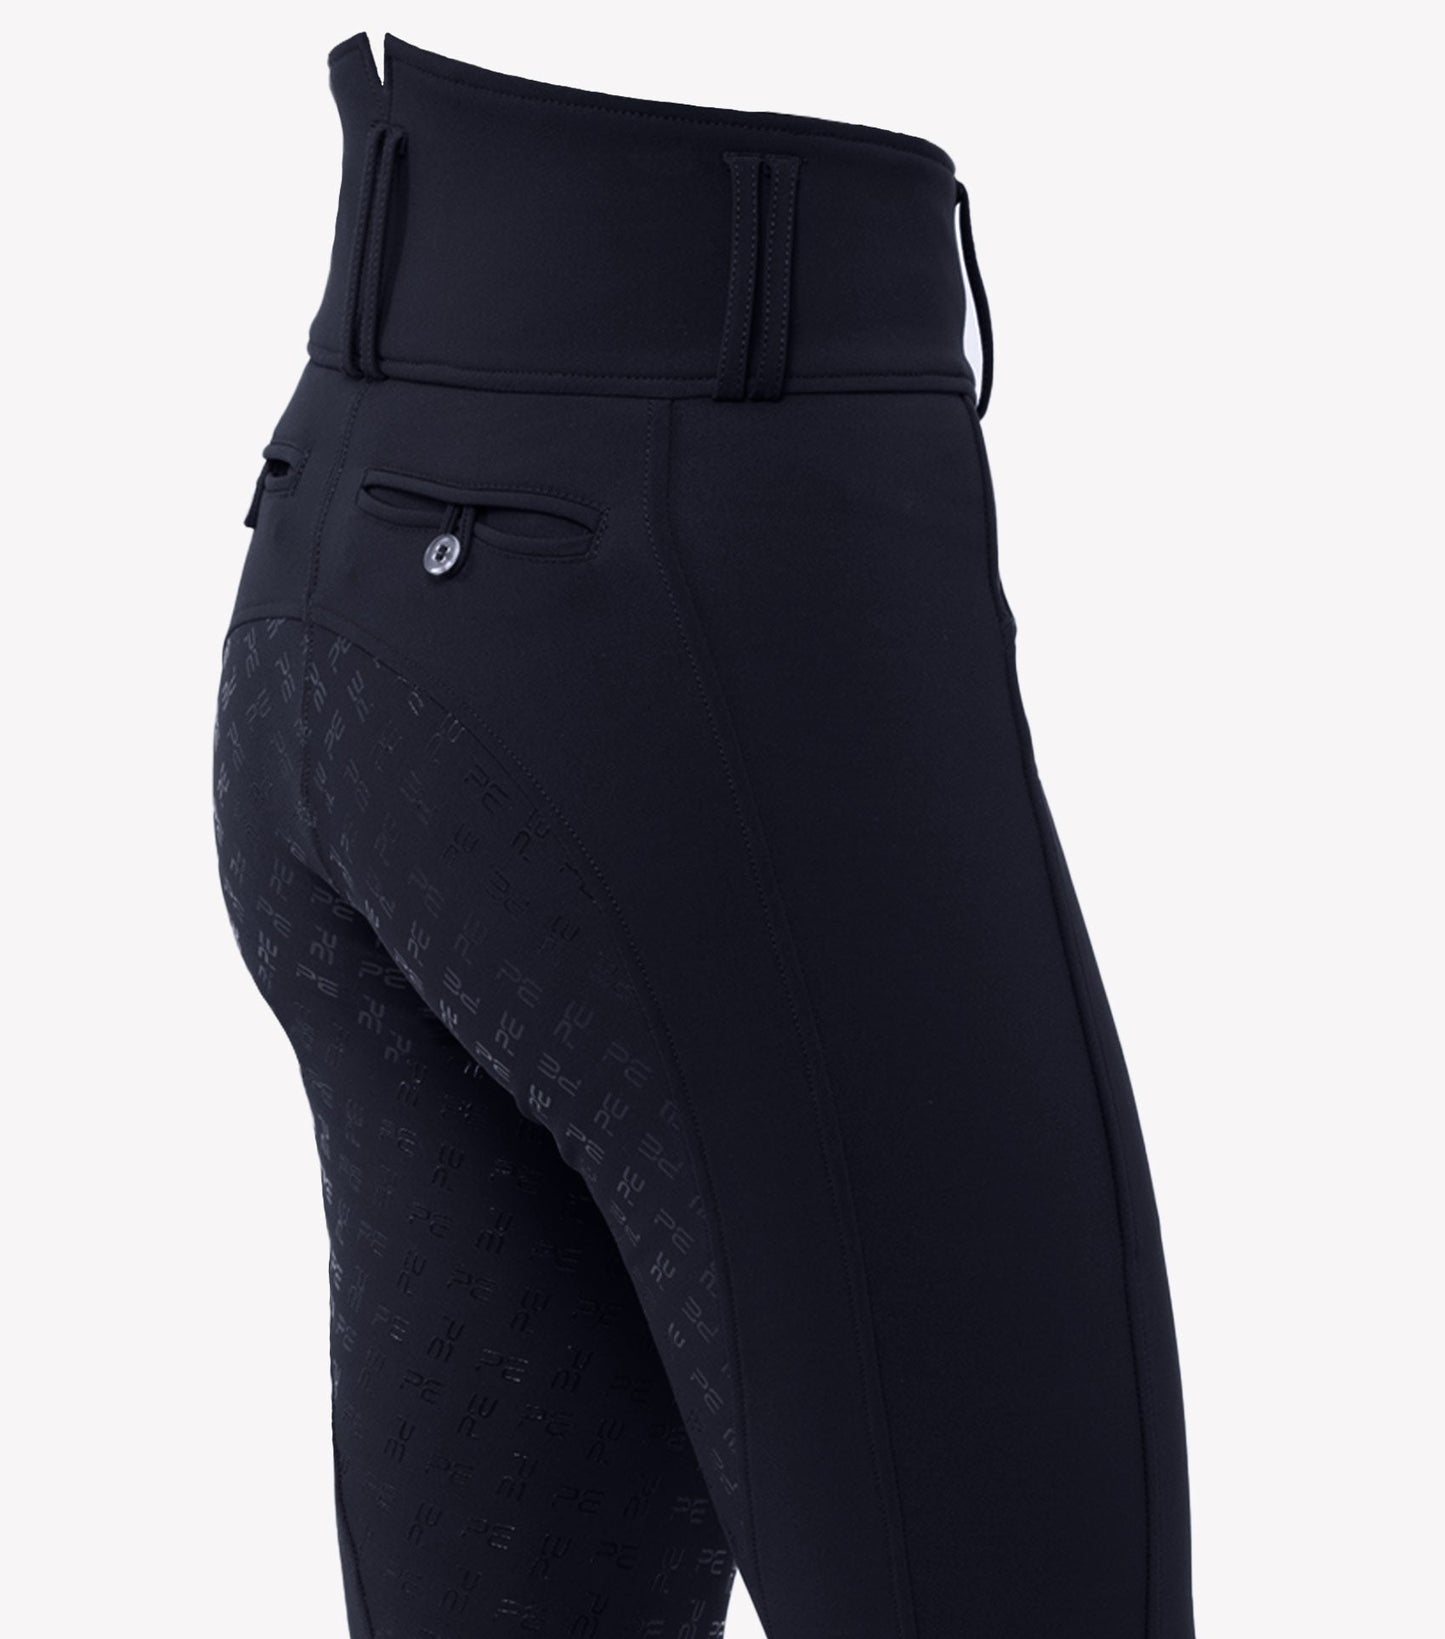 Premier Equine Coco II Ladies Gel Full Seat Riding Breeches, high waisted - grey and navy